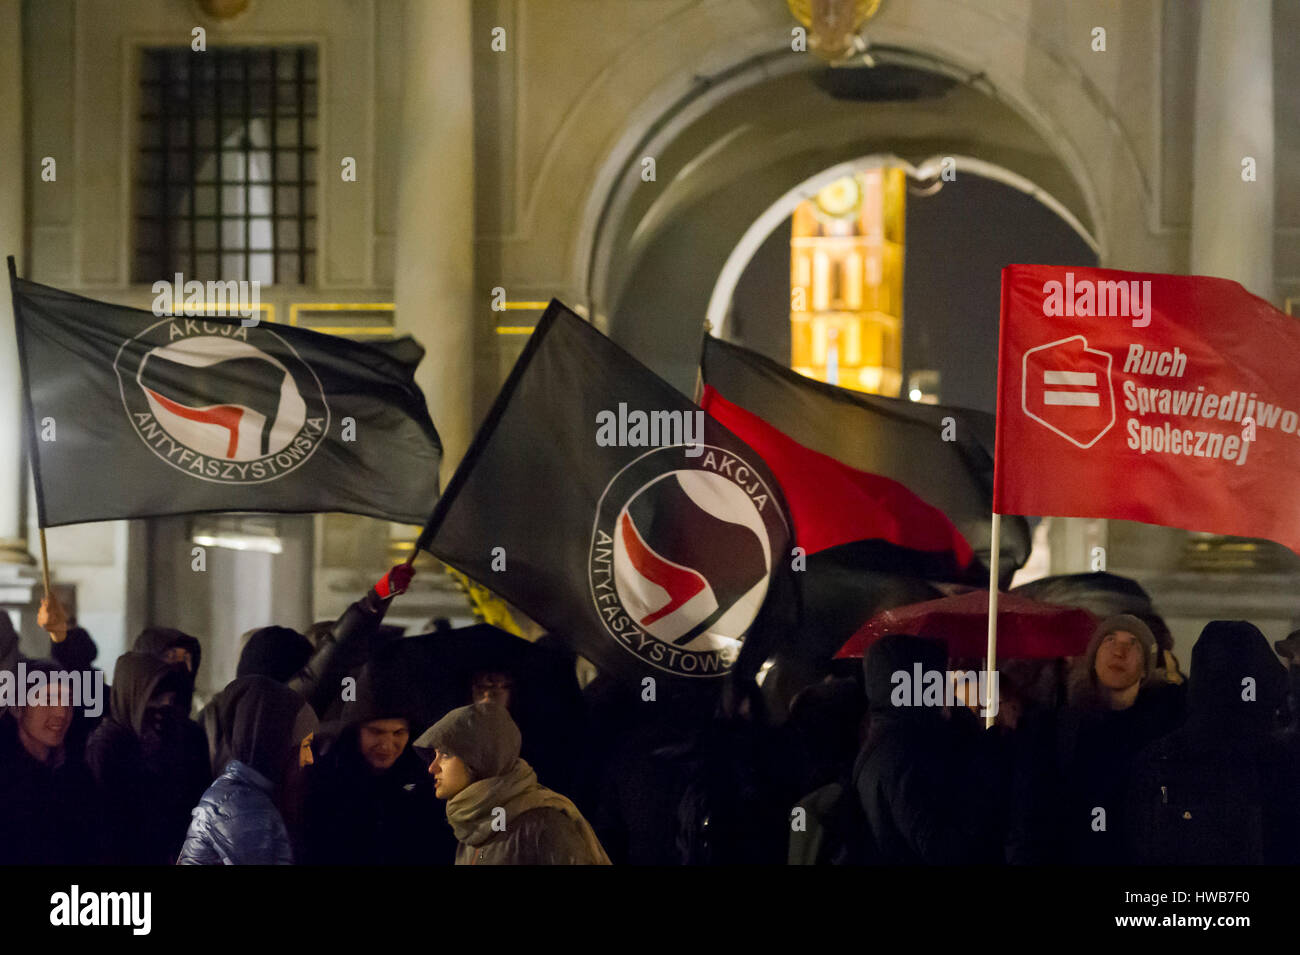 Anti-racism demonstration on 18 March 2017 in Gdansk, Poland . On 21 March will be International Day for the Elimination of Racial Discrimination © Wojciech Strozyk / Alamy Live News Stock Photo